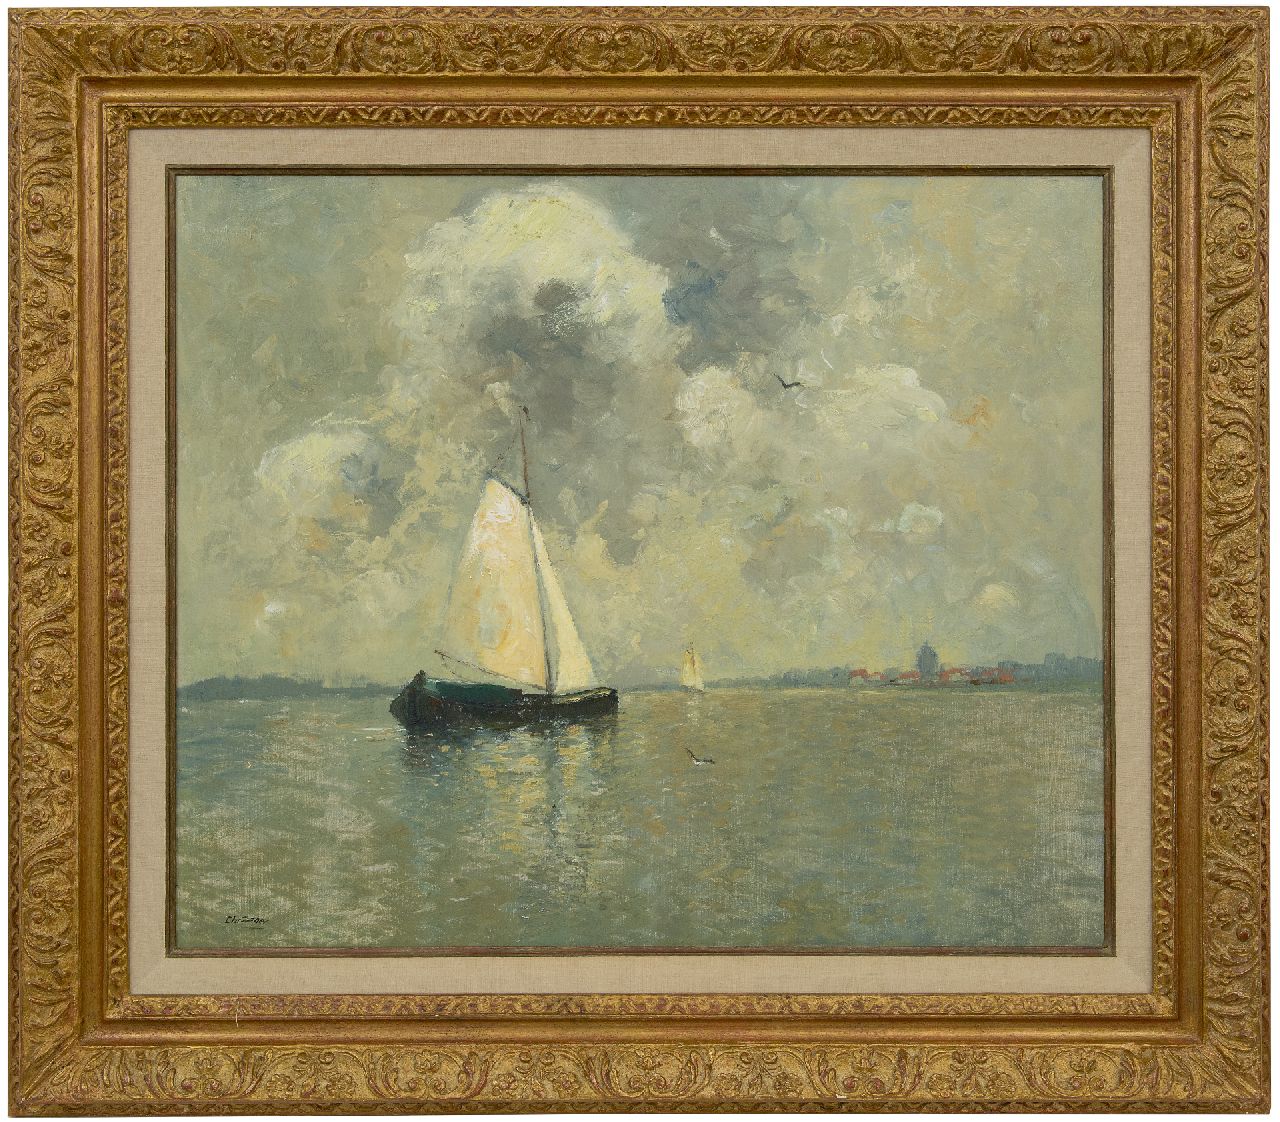 Soer C.  | Christiaan 'Chris' Soer, Sailing barge  on a river, oil on canvas laid down on panel 62.5 x 74.9 cm, signed l.l.